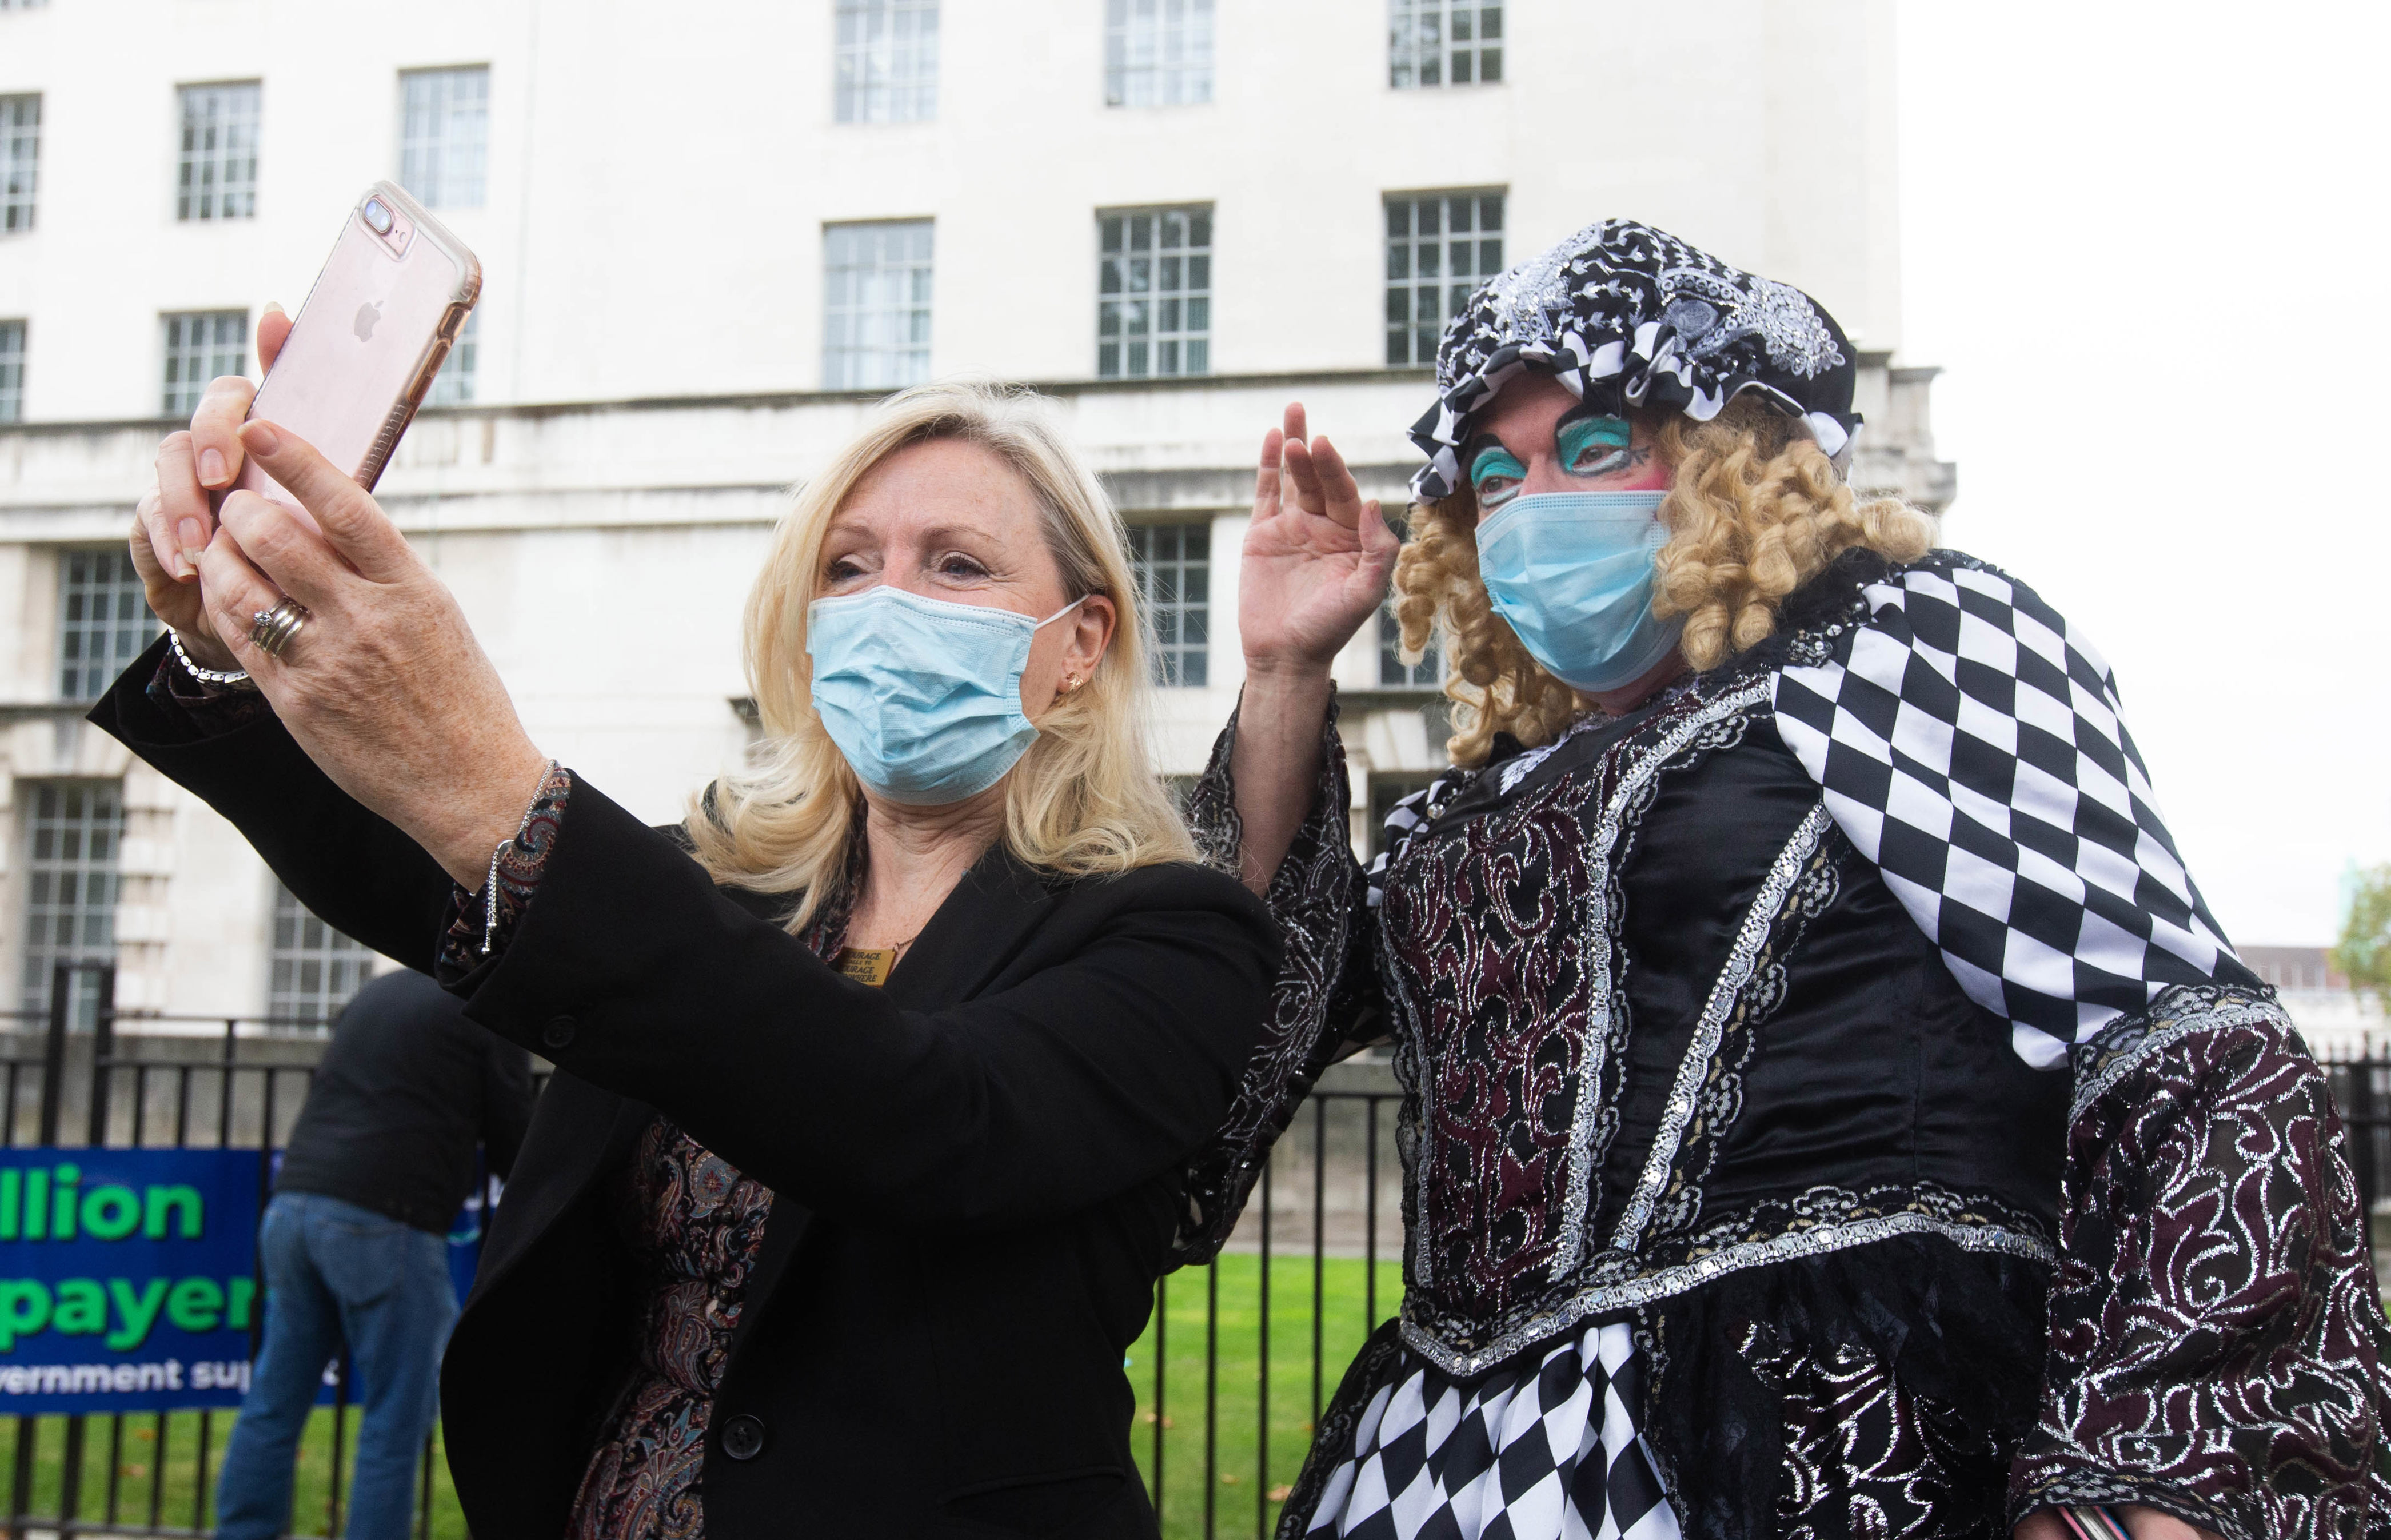 Photo shows politician and panto performer taking a selfie photo while wearing face masks